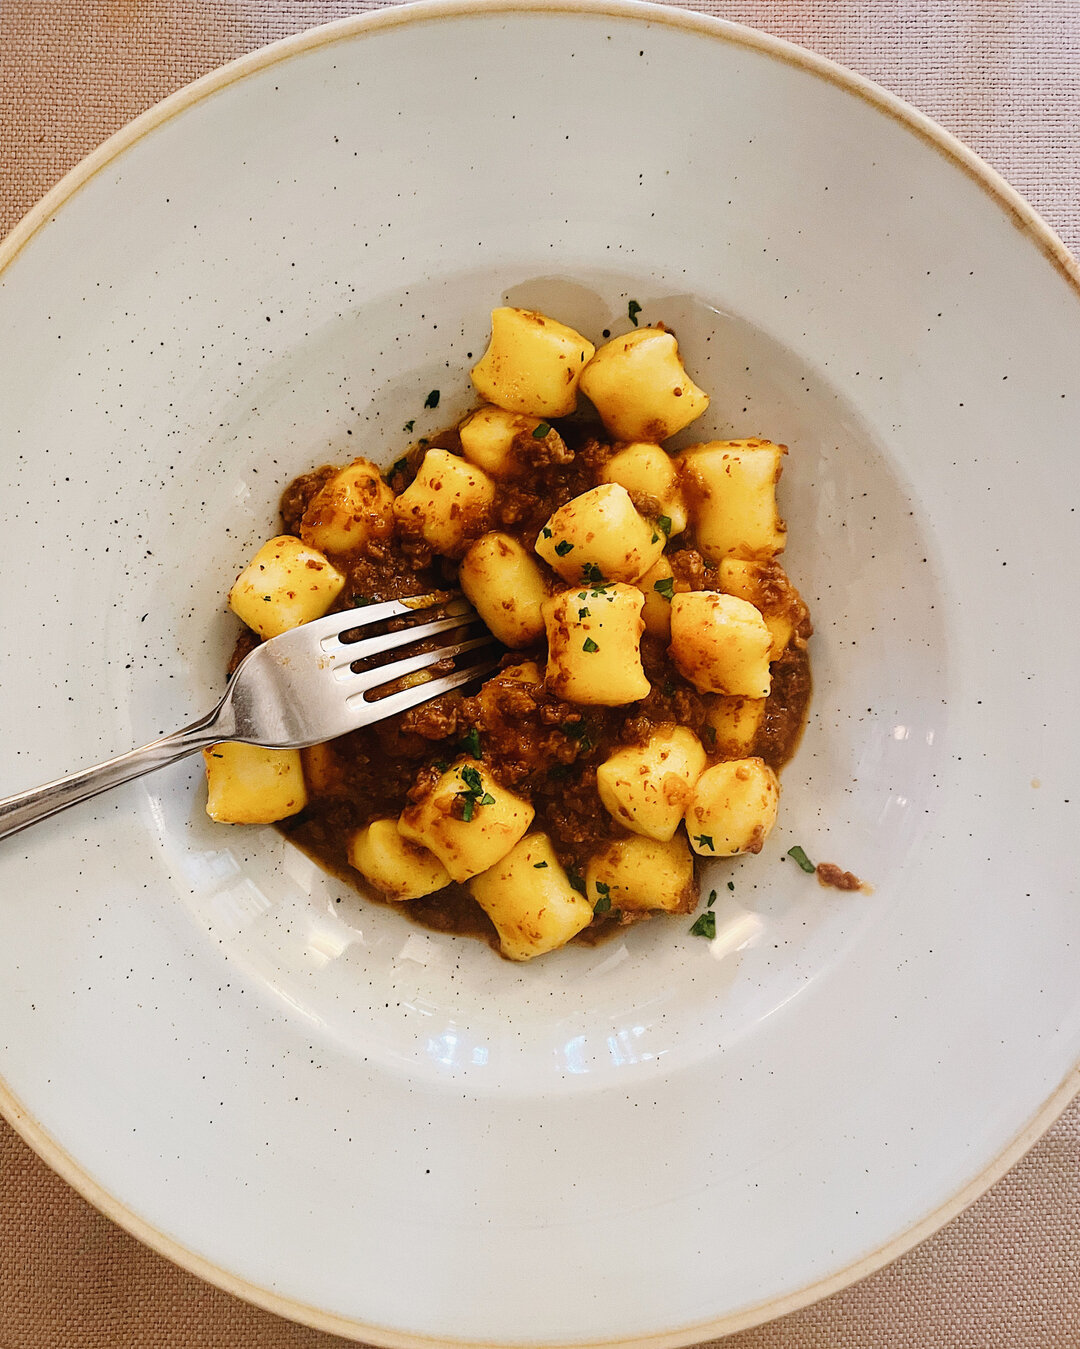 Wishing lunch was this today. 😕 Like if you&rsquo;re with me! ⠀⠀⠀⠀⠀⠀⠀⠀⠀
⠀⠀⠀⠀⠀⠀⠀⠀⠀
There&rsquo;s nothing like a plate of piping hot #gnocchi to warm your belly on a cold winter day.⠀⠀⠀⠀⠀⠀⠀⠀⠀
⠀⠀⠀⠀⠀⠀⠀⠀⠀
❄️ What&rsquo;s your go-to winter comfort food?⠀⠀